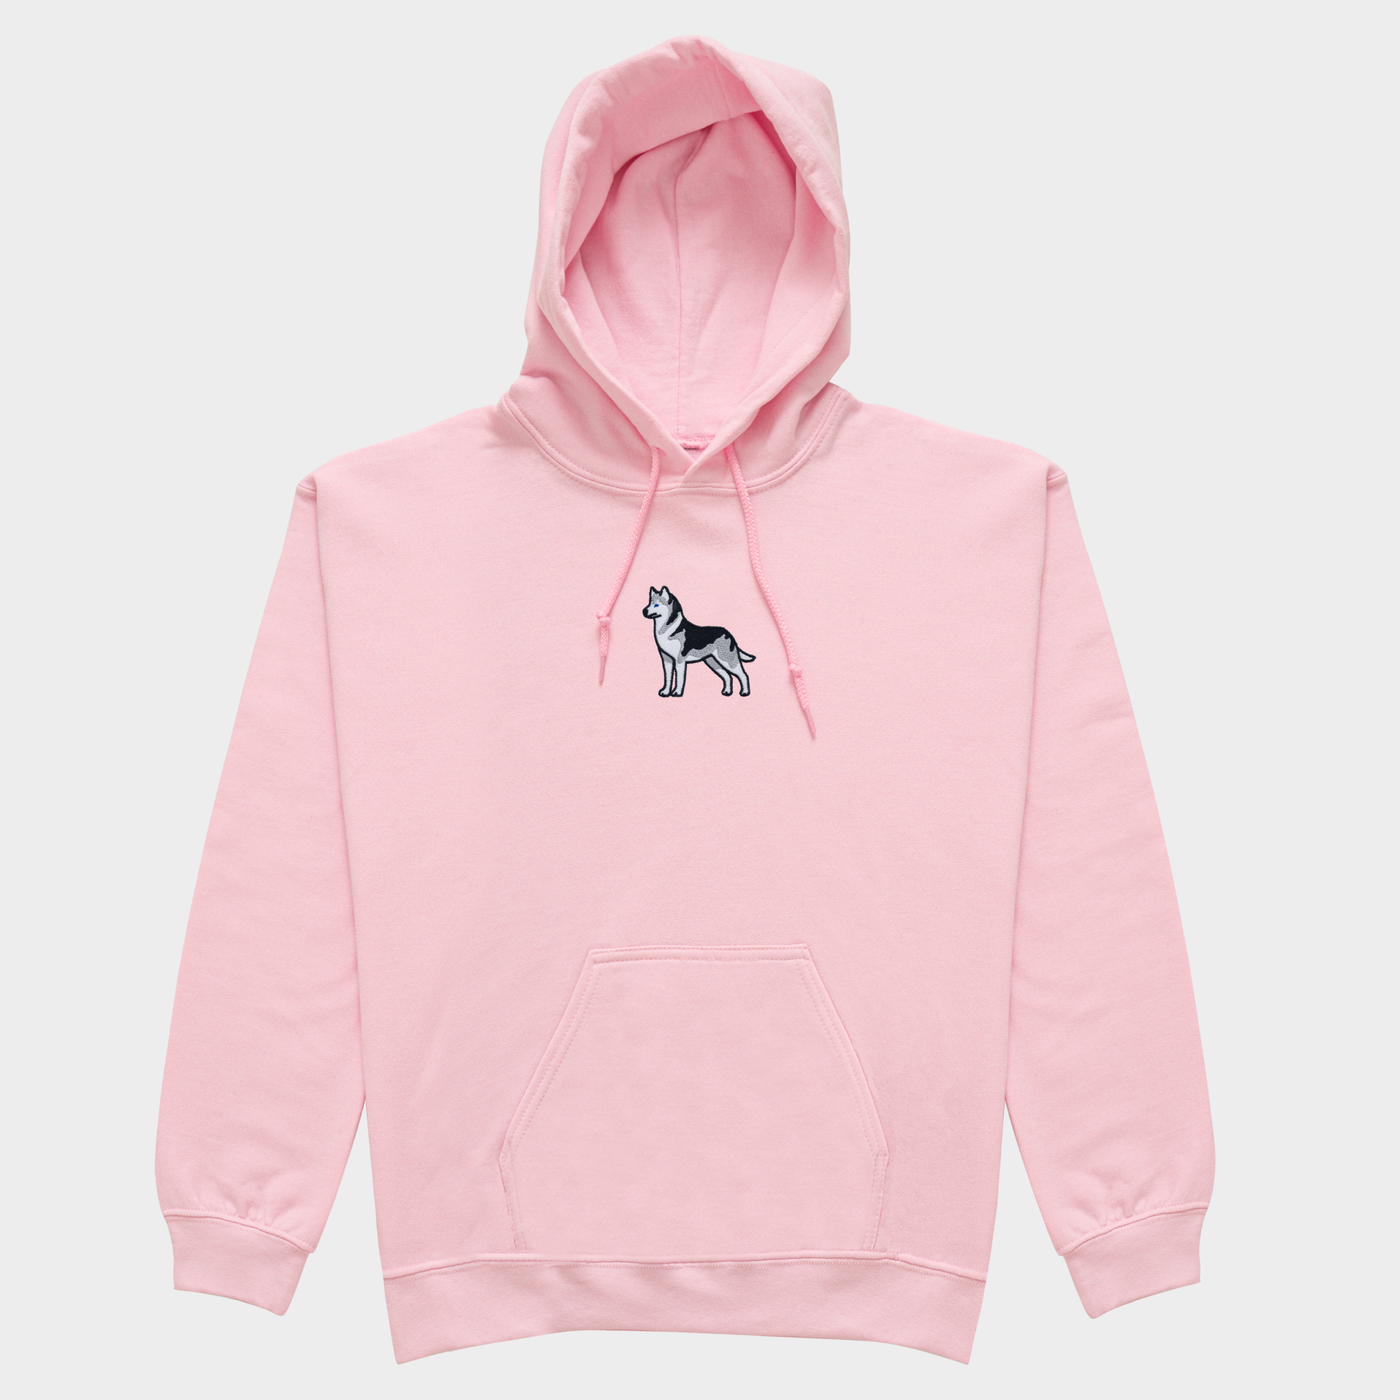 Bobby's Planet Women's Embroidered Siberian Husky Hoodie from Paws Dog Cat Animals Collection in Light Pink Color#color_light-pink